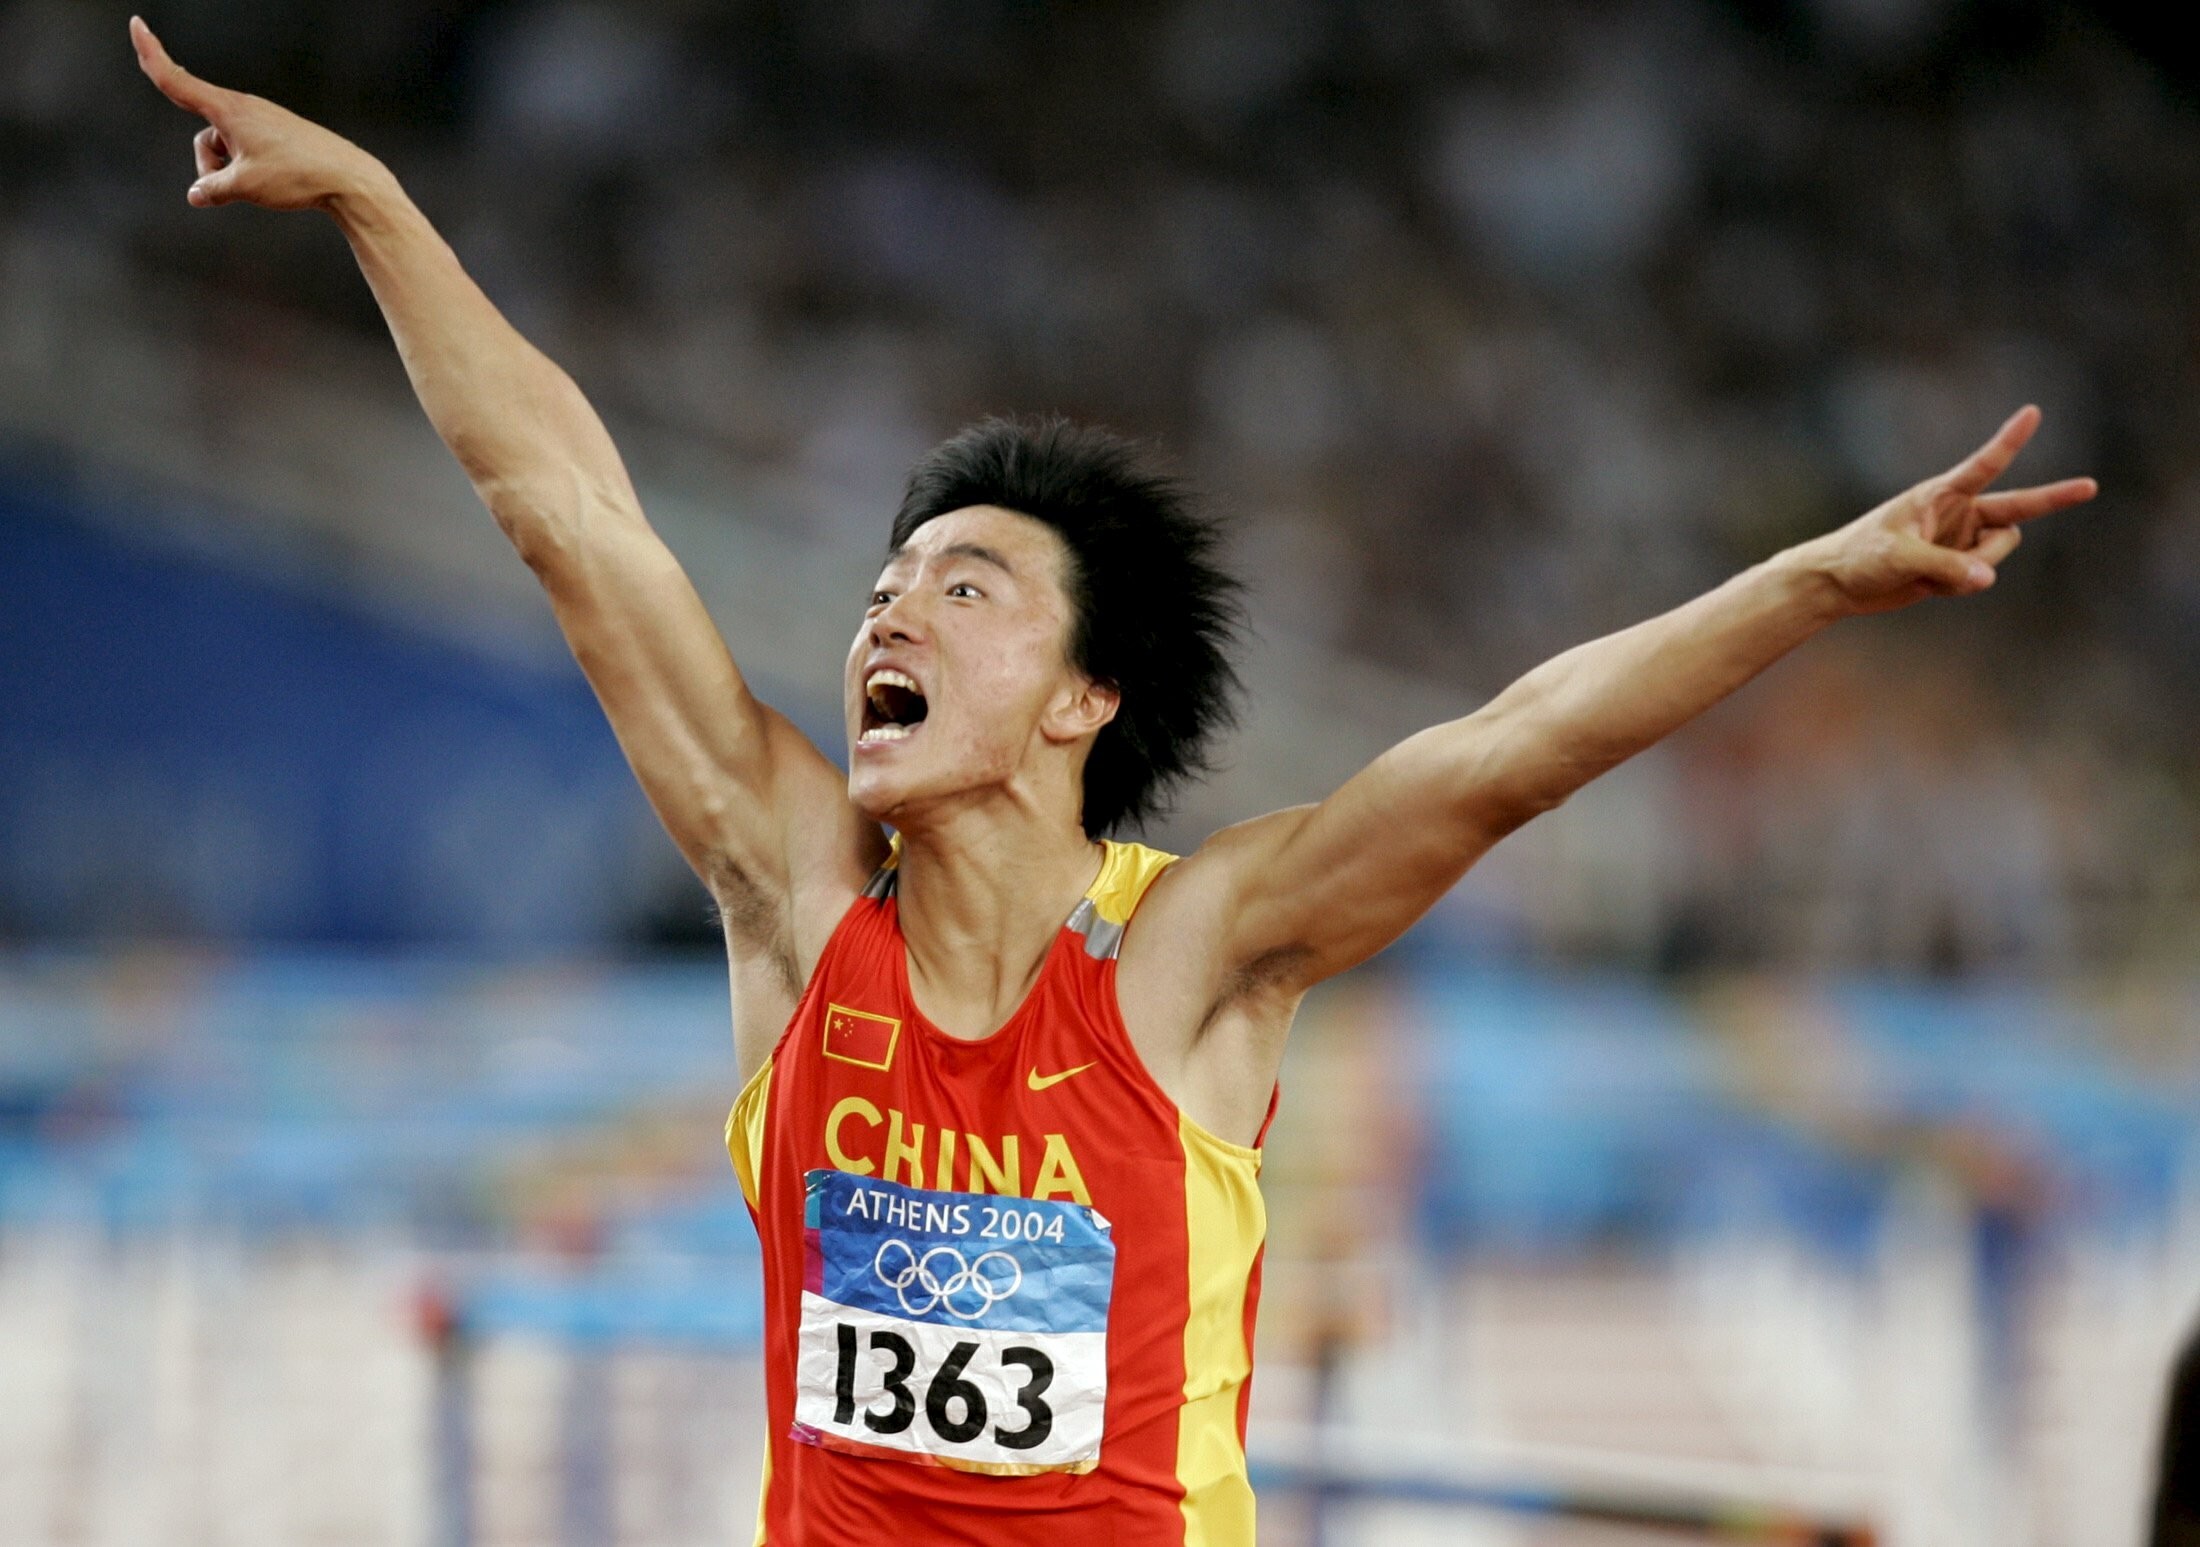 China's Liu Xiang celebrates as he crosses the finish line to win the men's 110 metres hurdle final at the Athens 2004 Olympic Games. Photo: Reuters